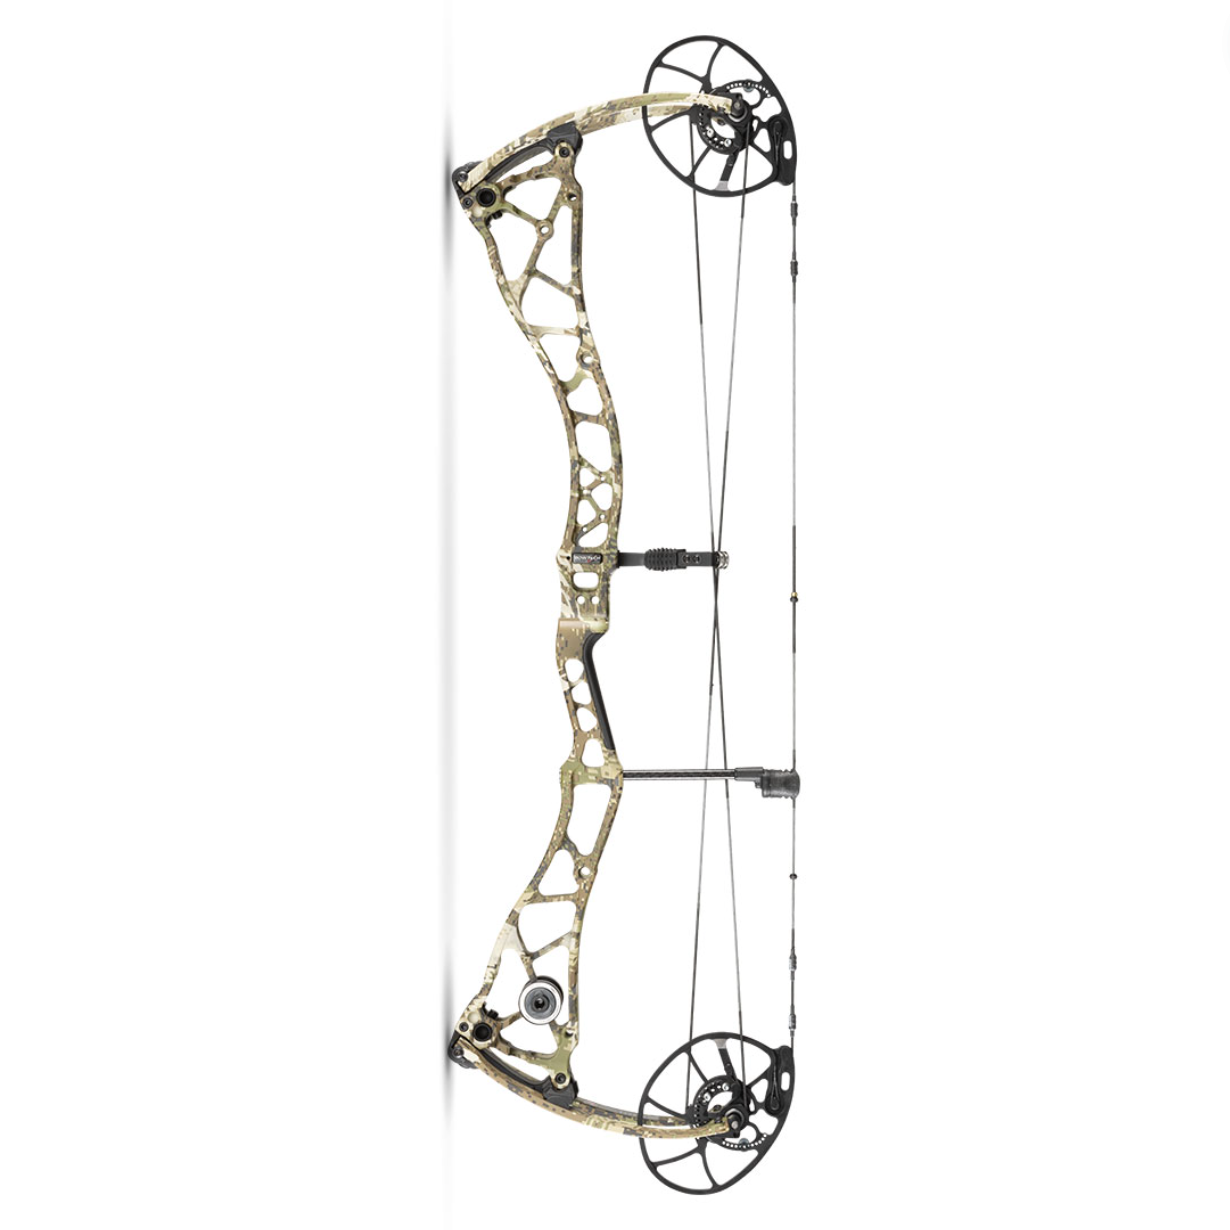 Bowtech SX80 Compound Hunting Bow